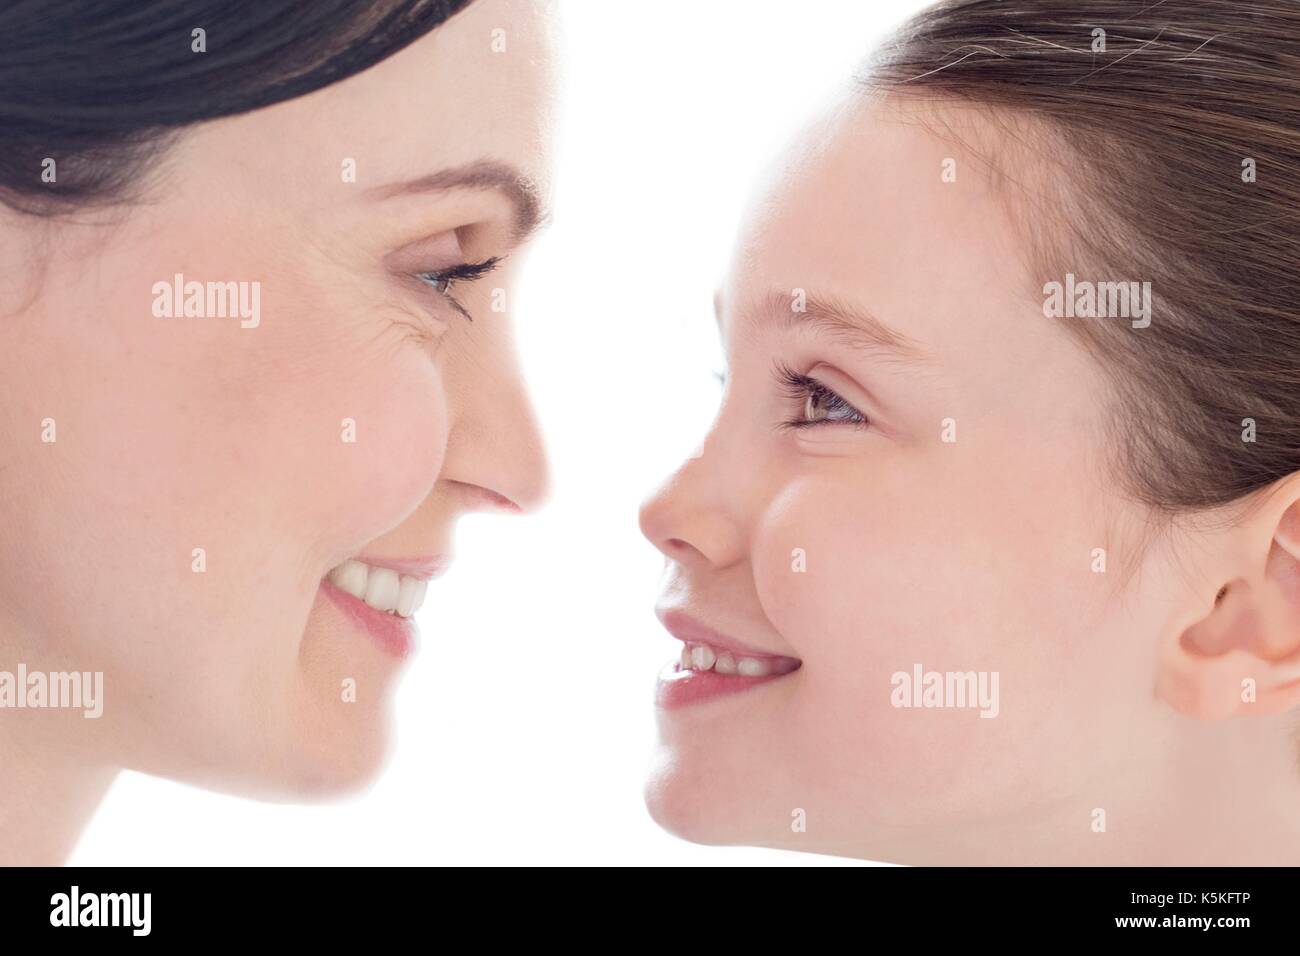 Mother and daughter face to face, smiling. Stock Photo